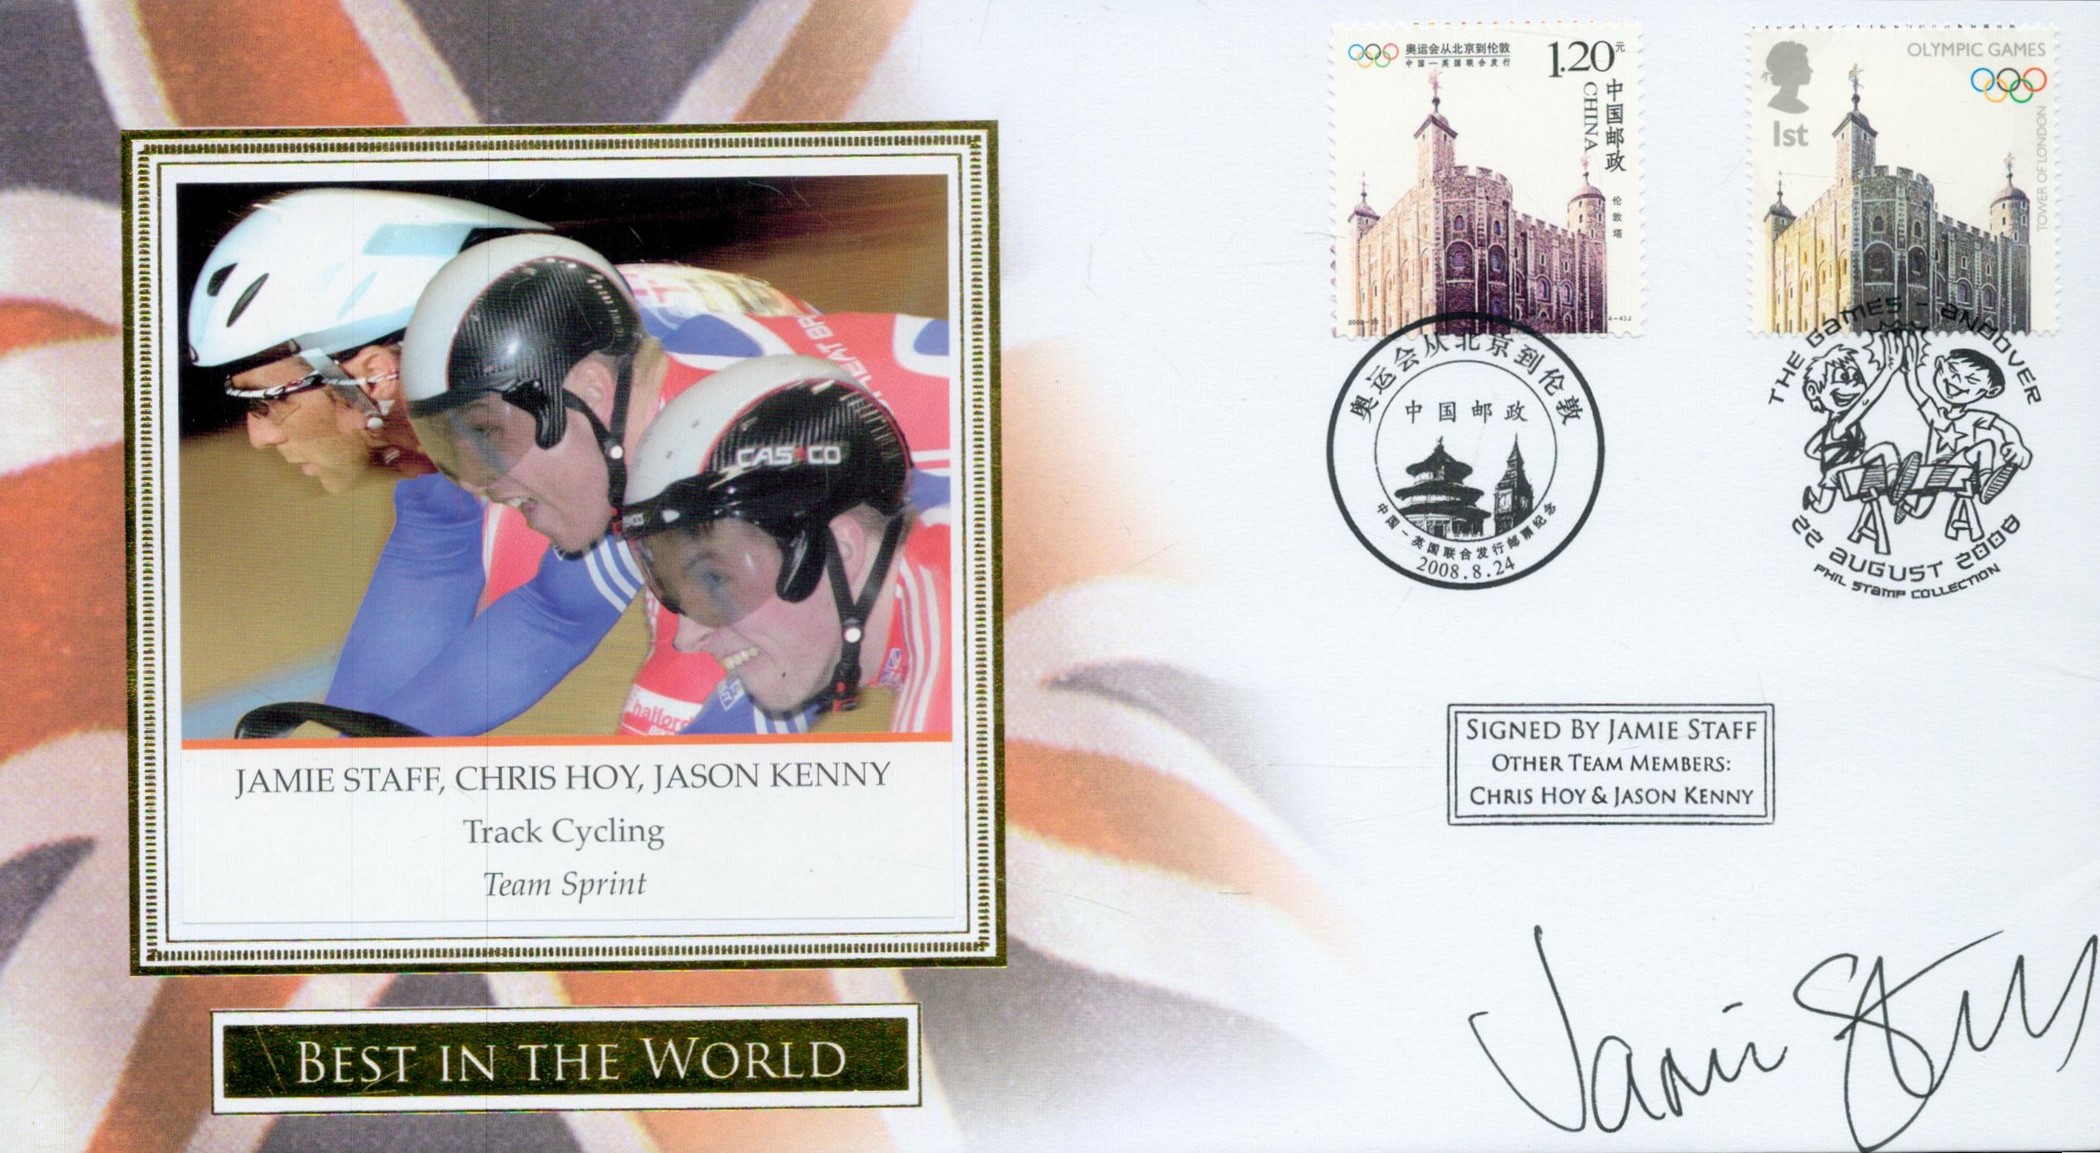 Jamie Staff (Track cycling team sprint) signed Best in the World Beijing Olympic games FDC. Double